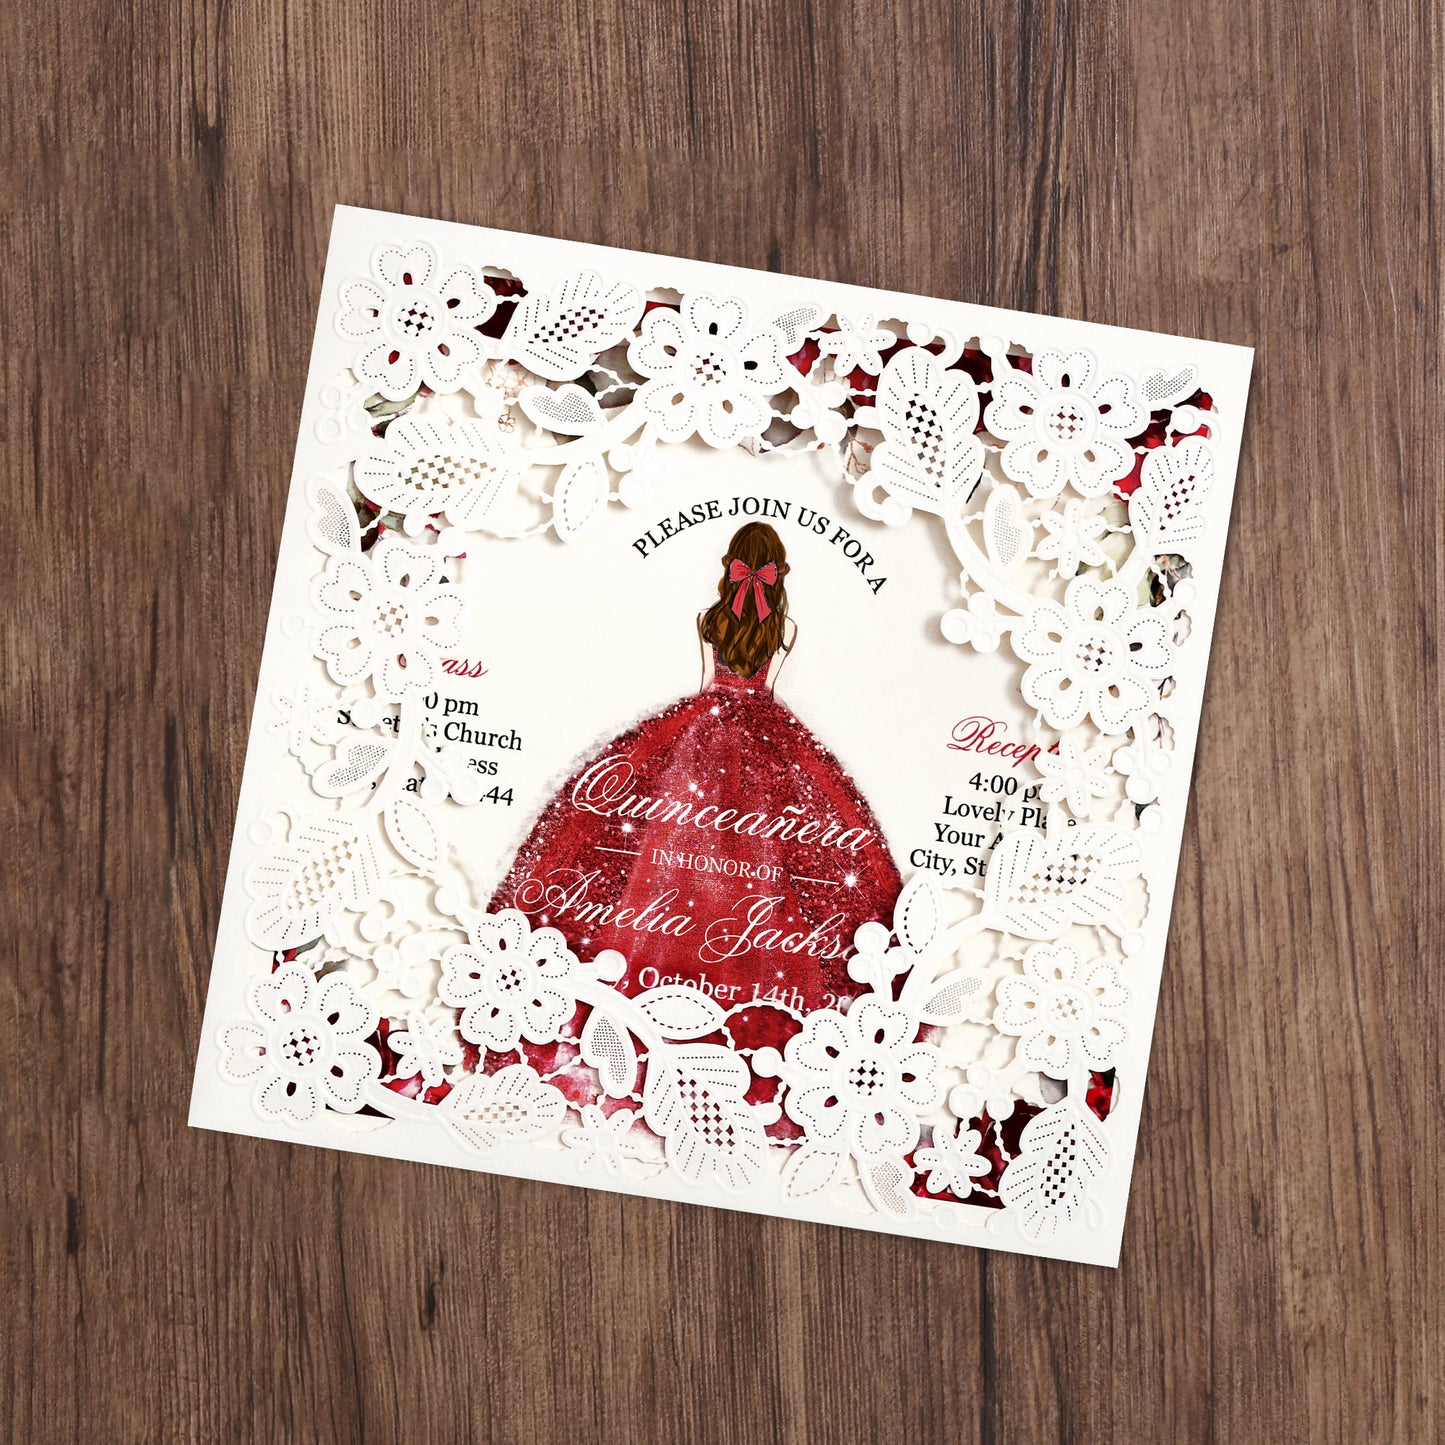 Customized Quinceanera Invitation Red, Elegant 15 years Invitations Sweet 16, Miss XV, Birthday Laser Cut Quince Invitation Cards White Personalized